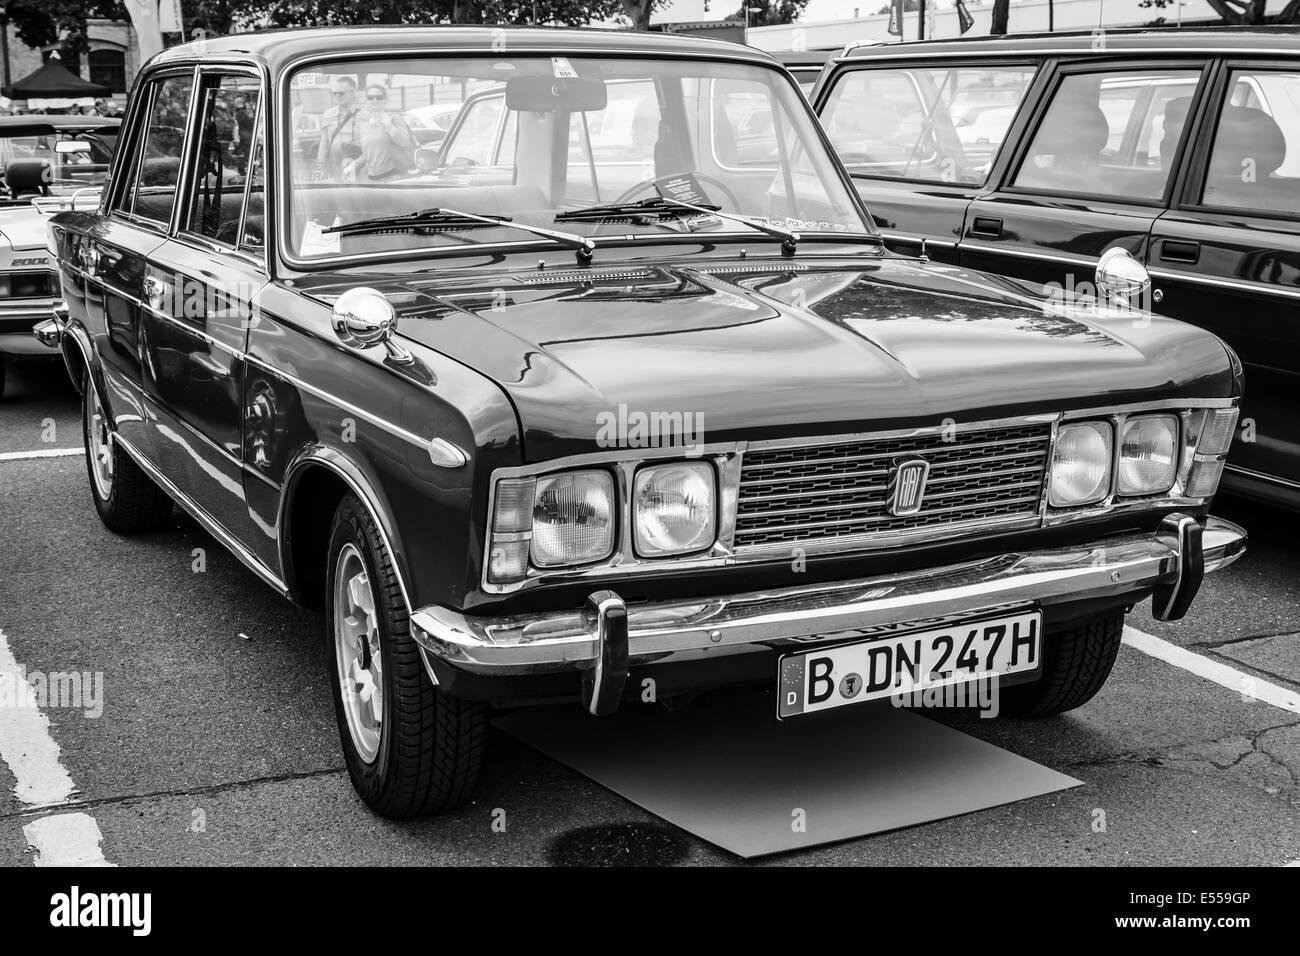 BERLIN, GERMANY - MAY 17, 2014: Large family car Fiat 125S, 1970. Black and white. 27th Oldtimer Day Berlin - Brandenburg Stock Photo